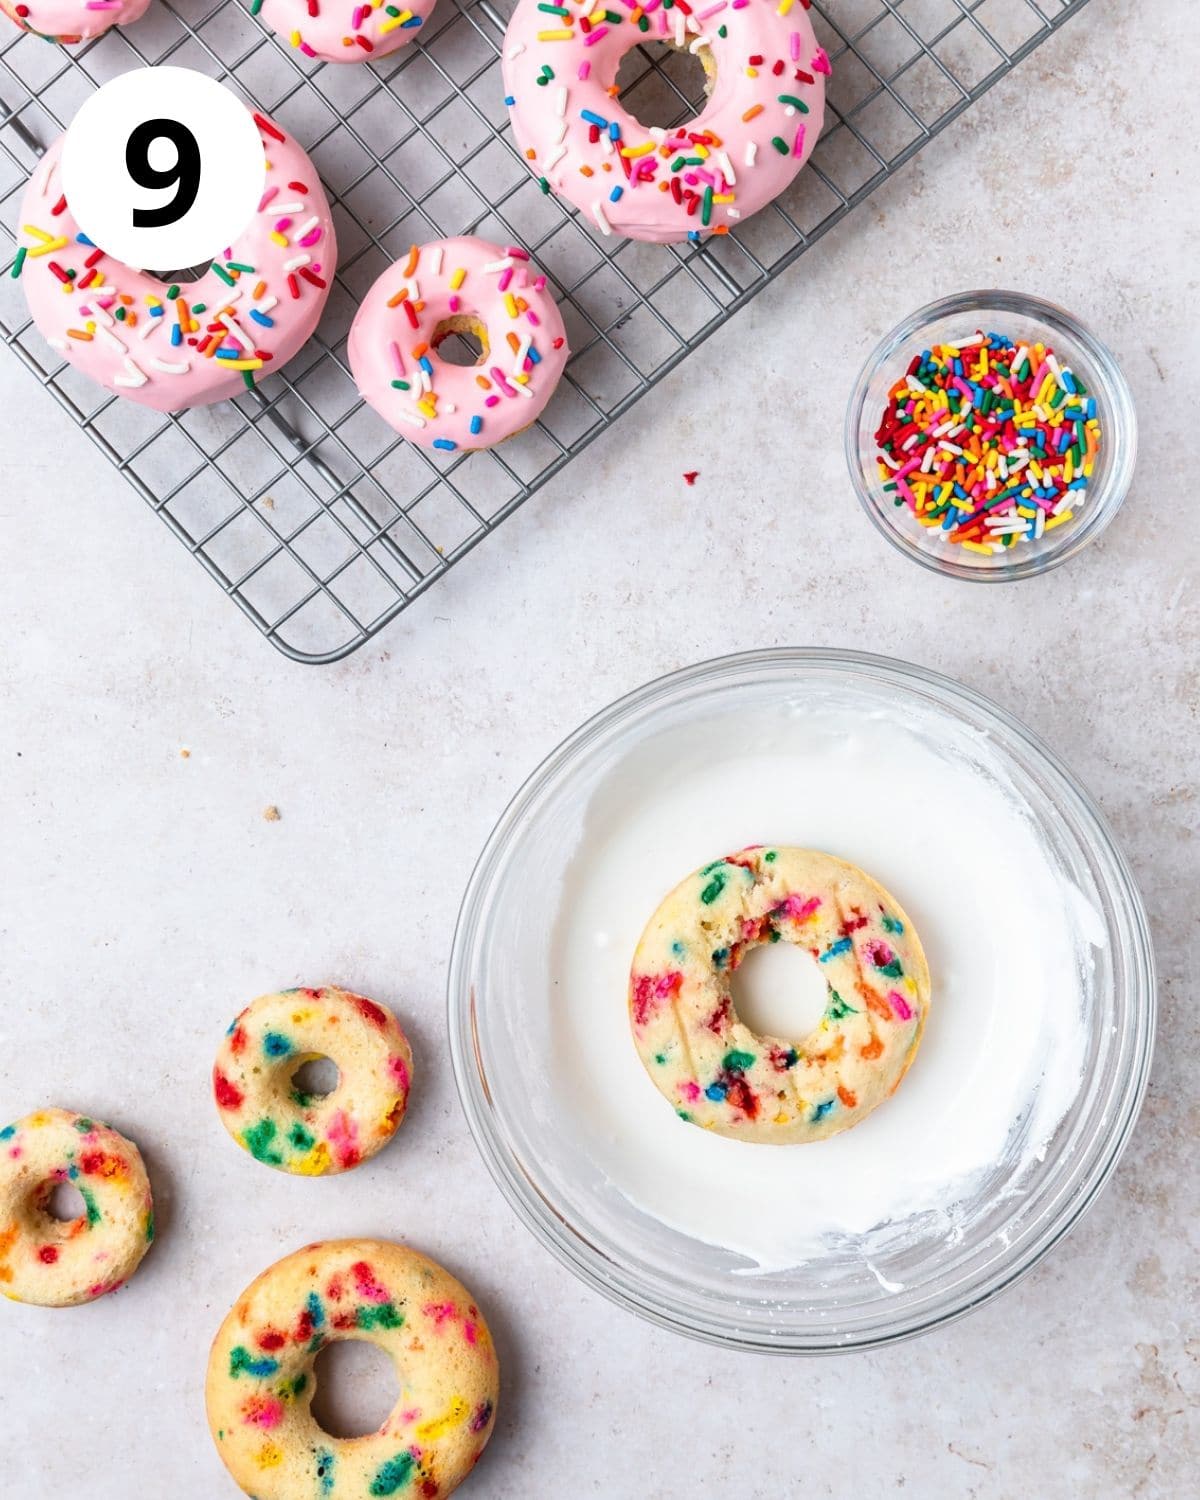 dipping funfetti baked donuts in glaze.